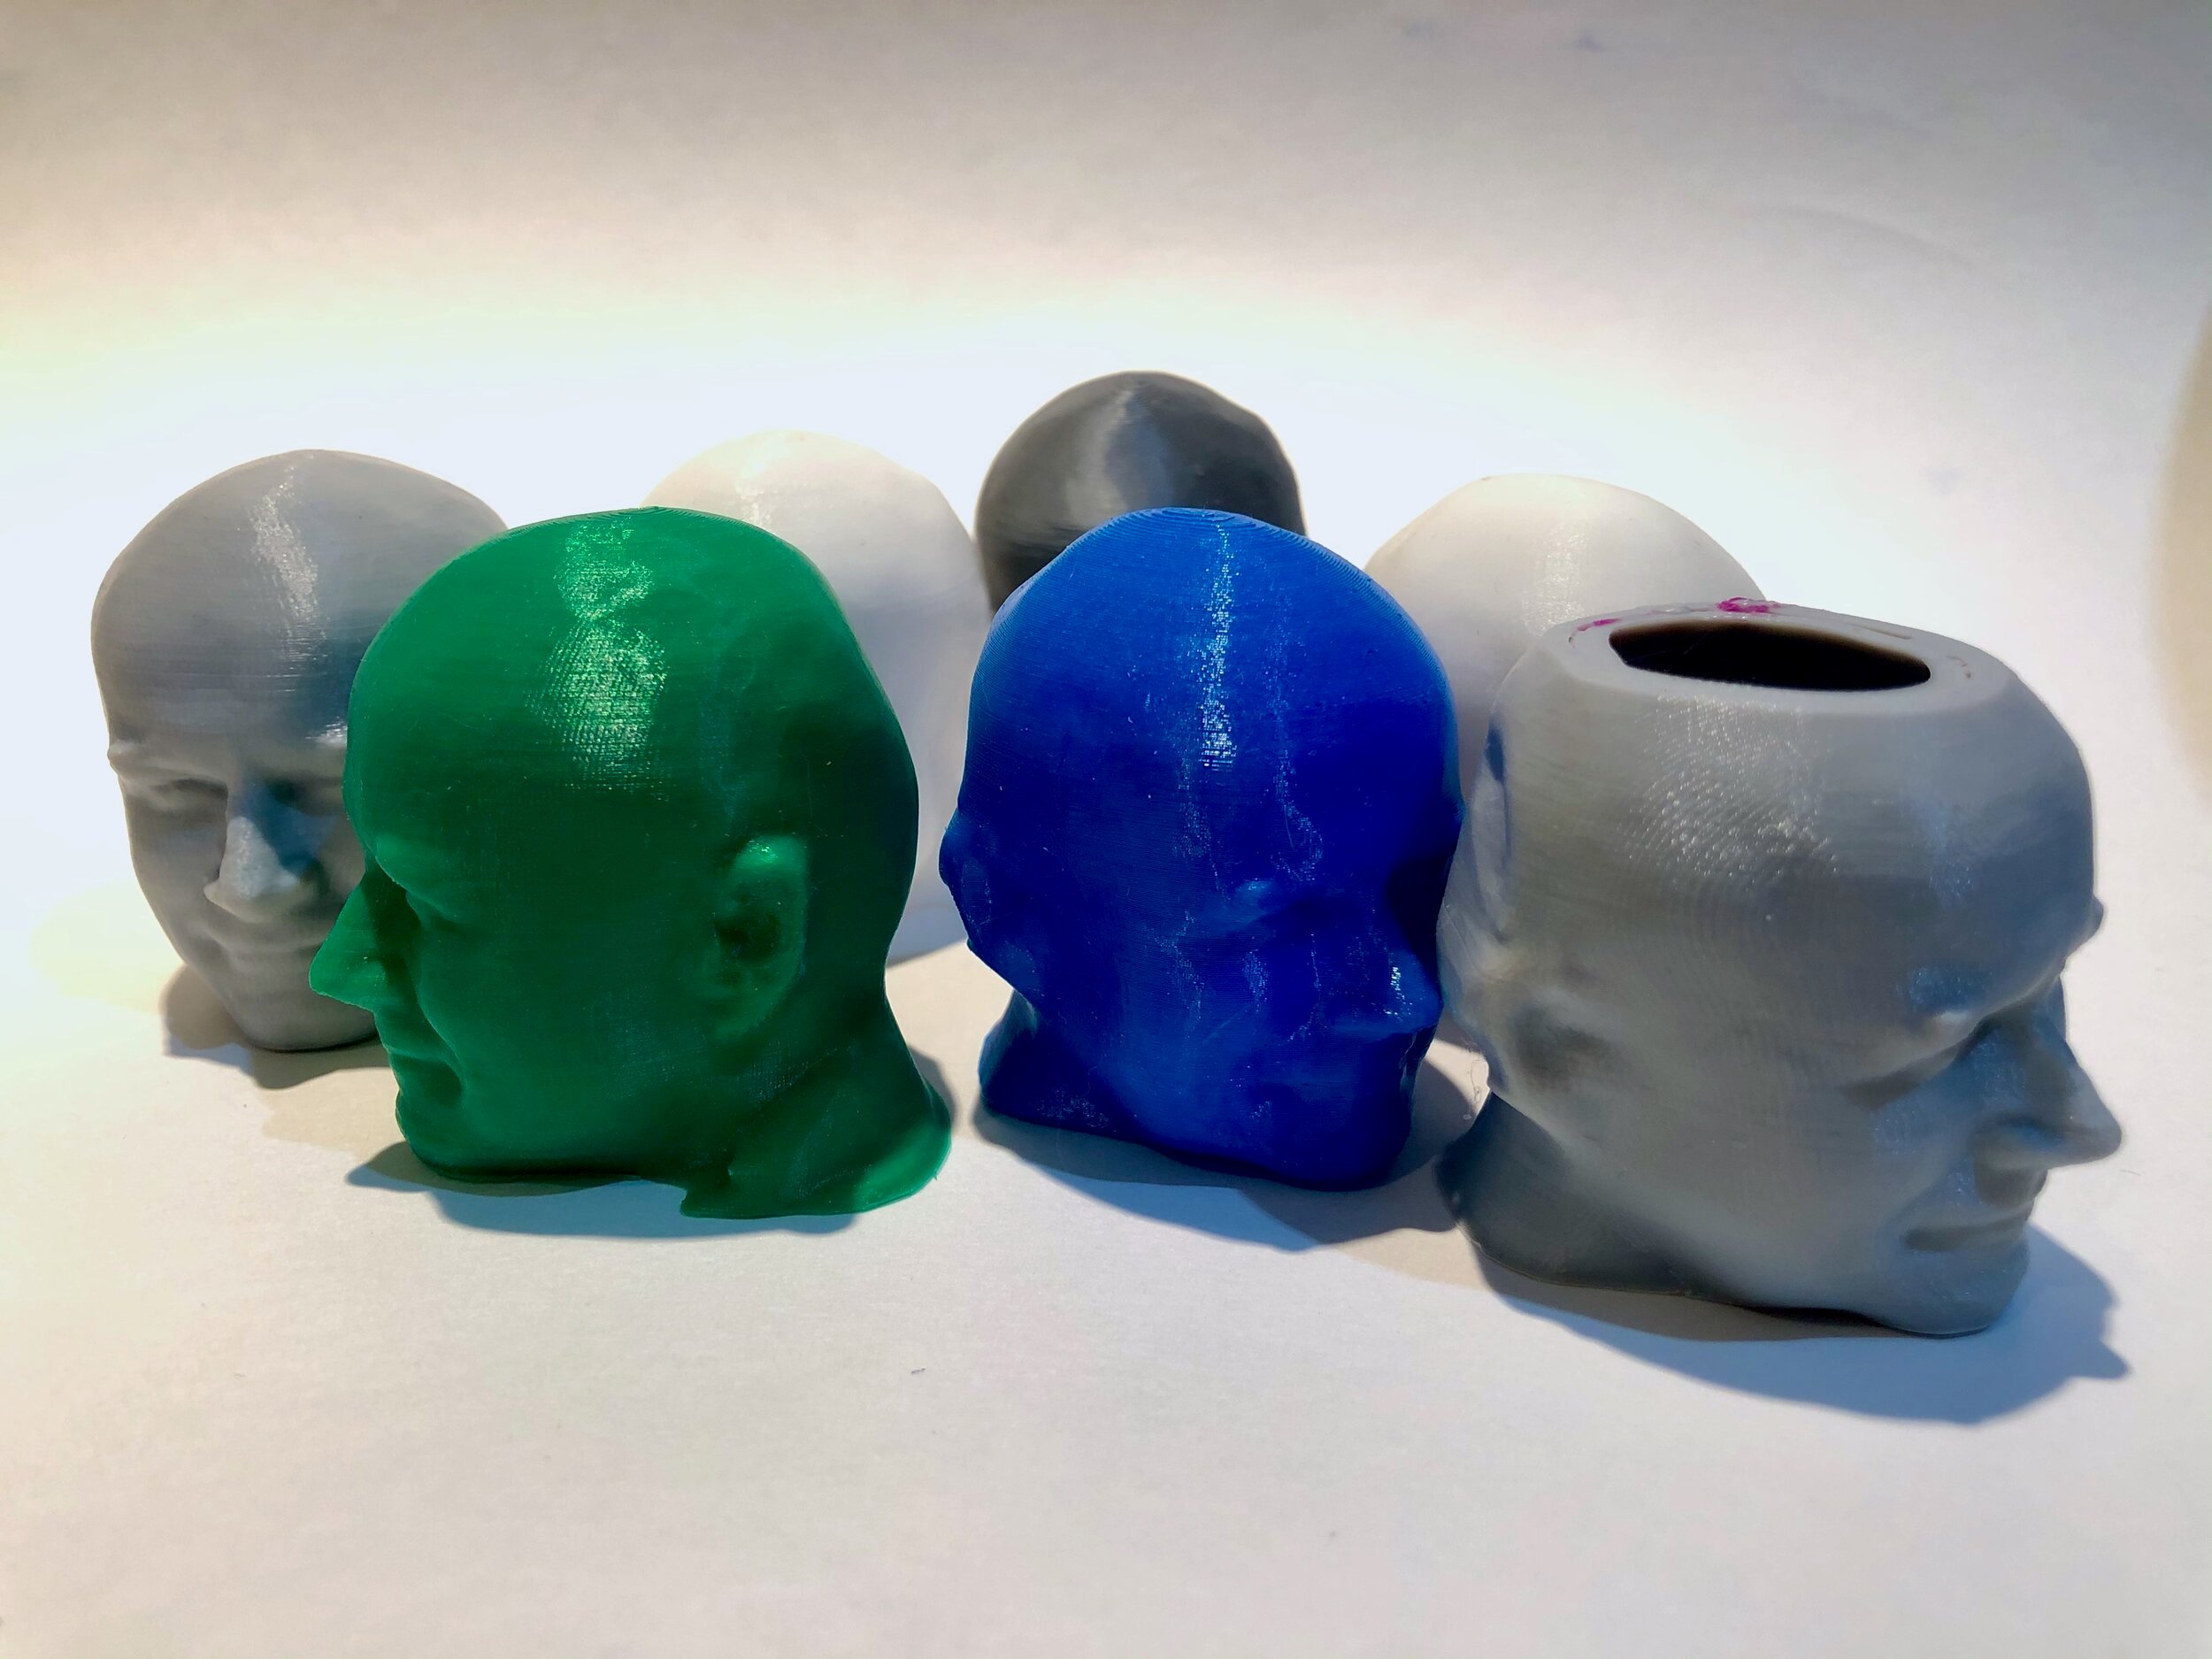  Some of my test “Robert” heads for 3D printer calibration [Source: Fabbaloo] 